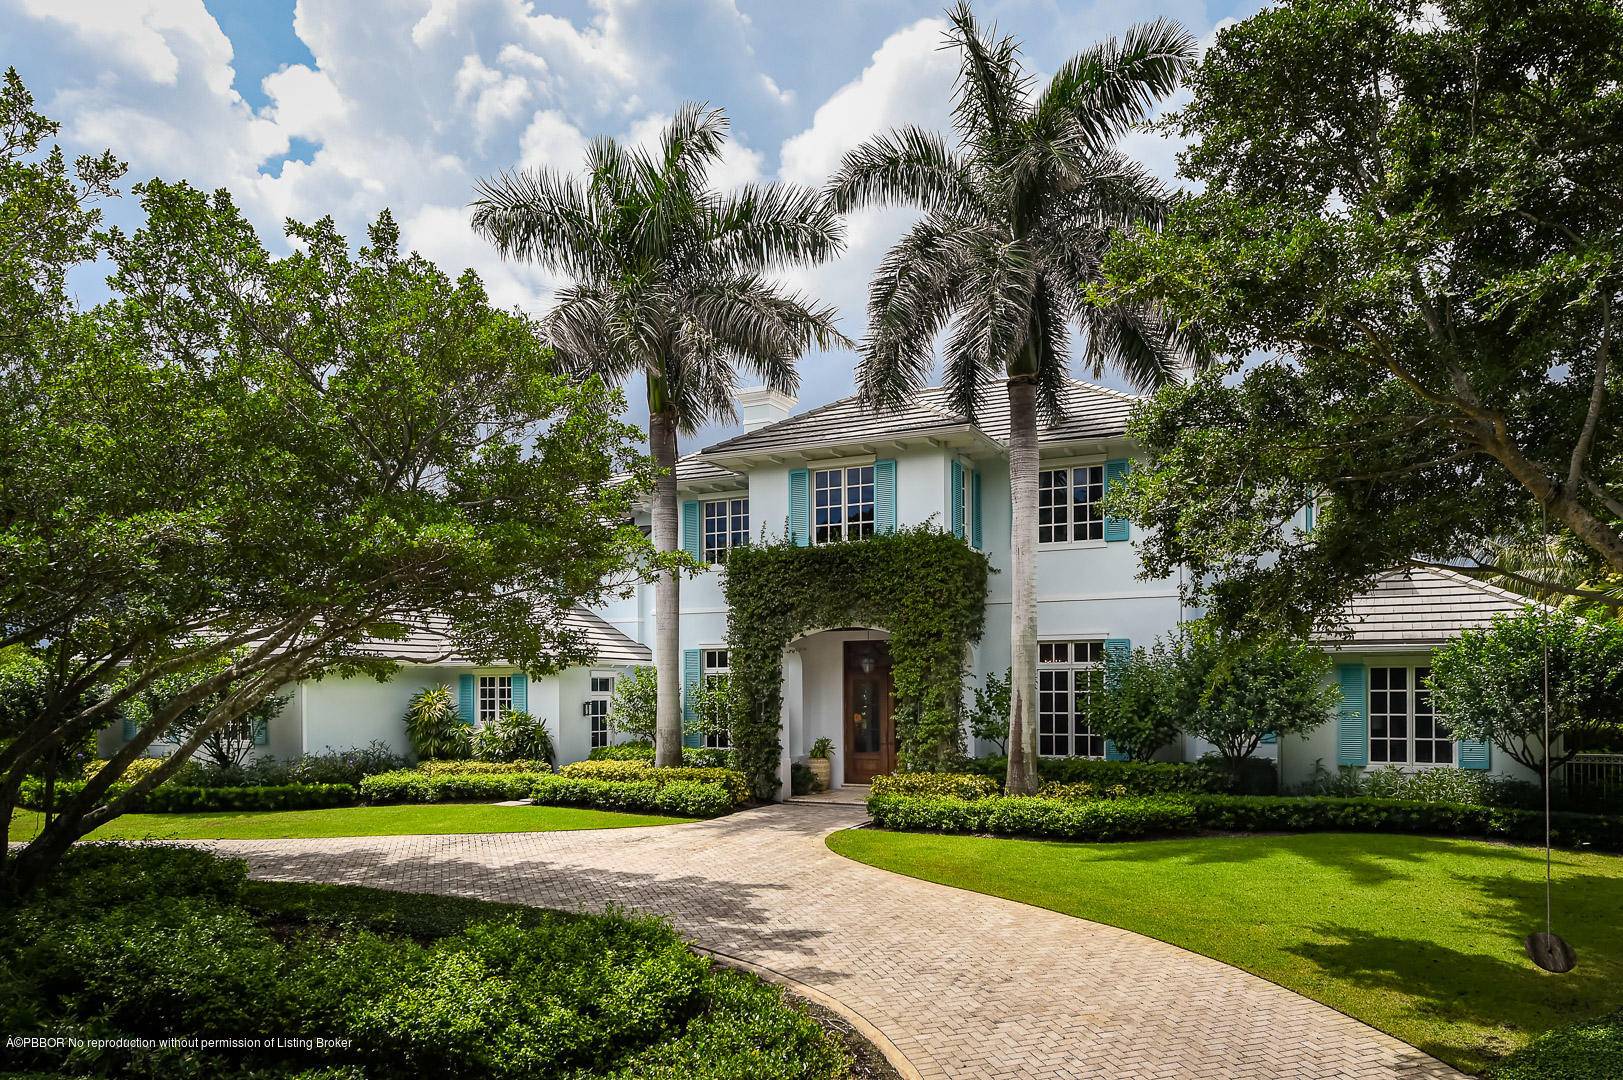 Located in the Seminole Landing, this custom built waterfront house has been impeccably maintained and is ready for you to call home.